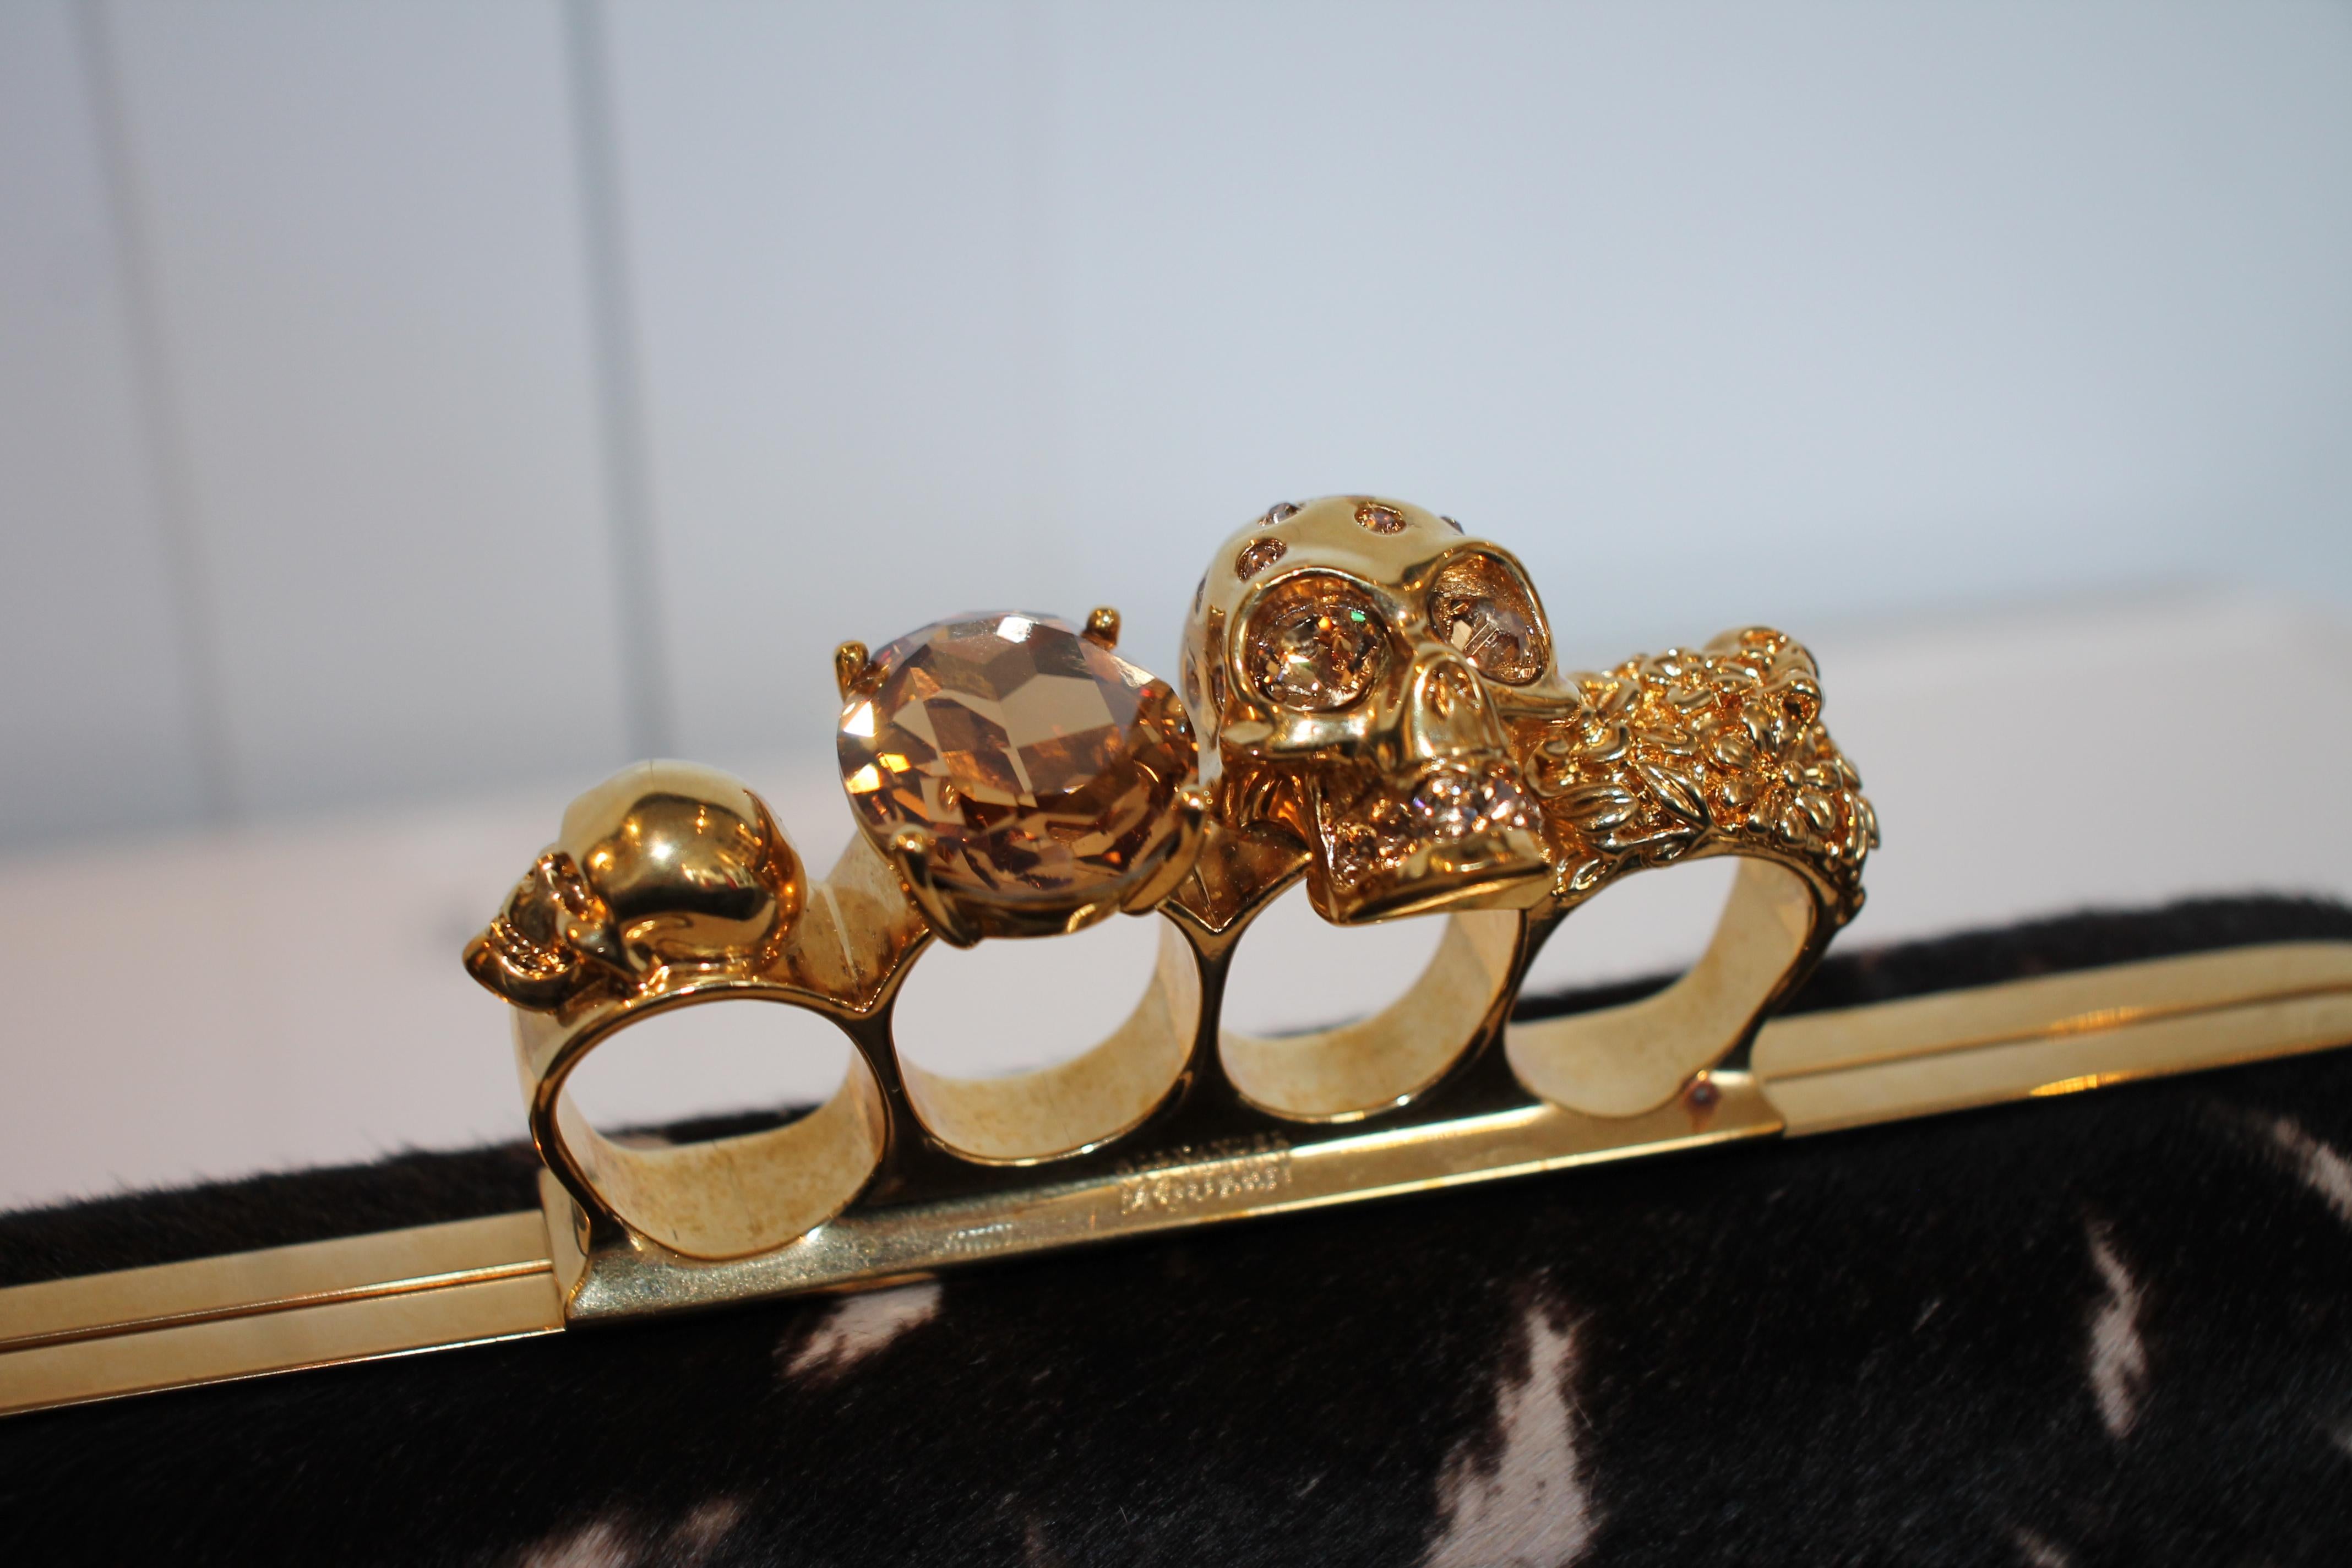 Alexander McQueen Ponyhair Knuckle Duster Clutch In Excellent Condition For Sale In Roslyn, NY